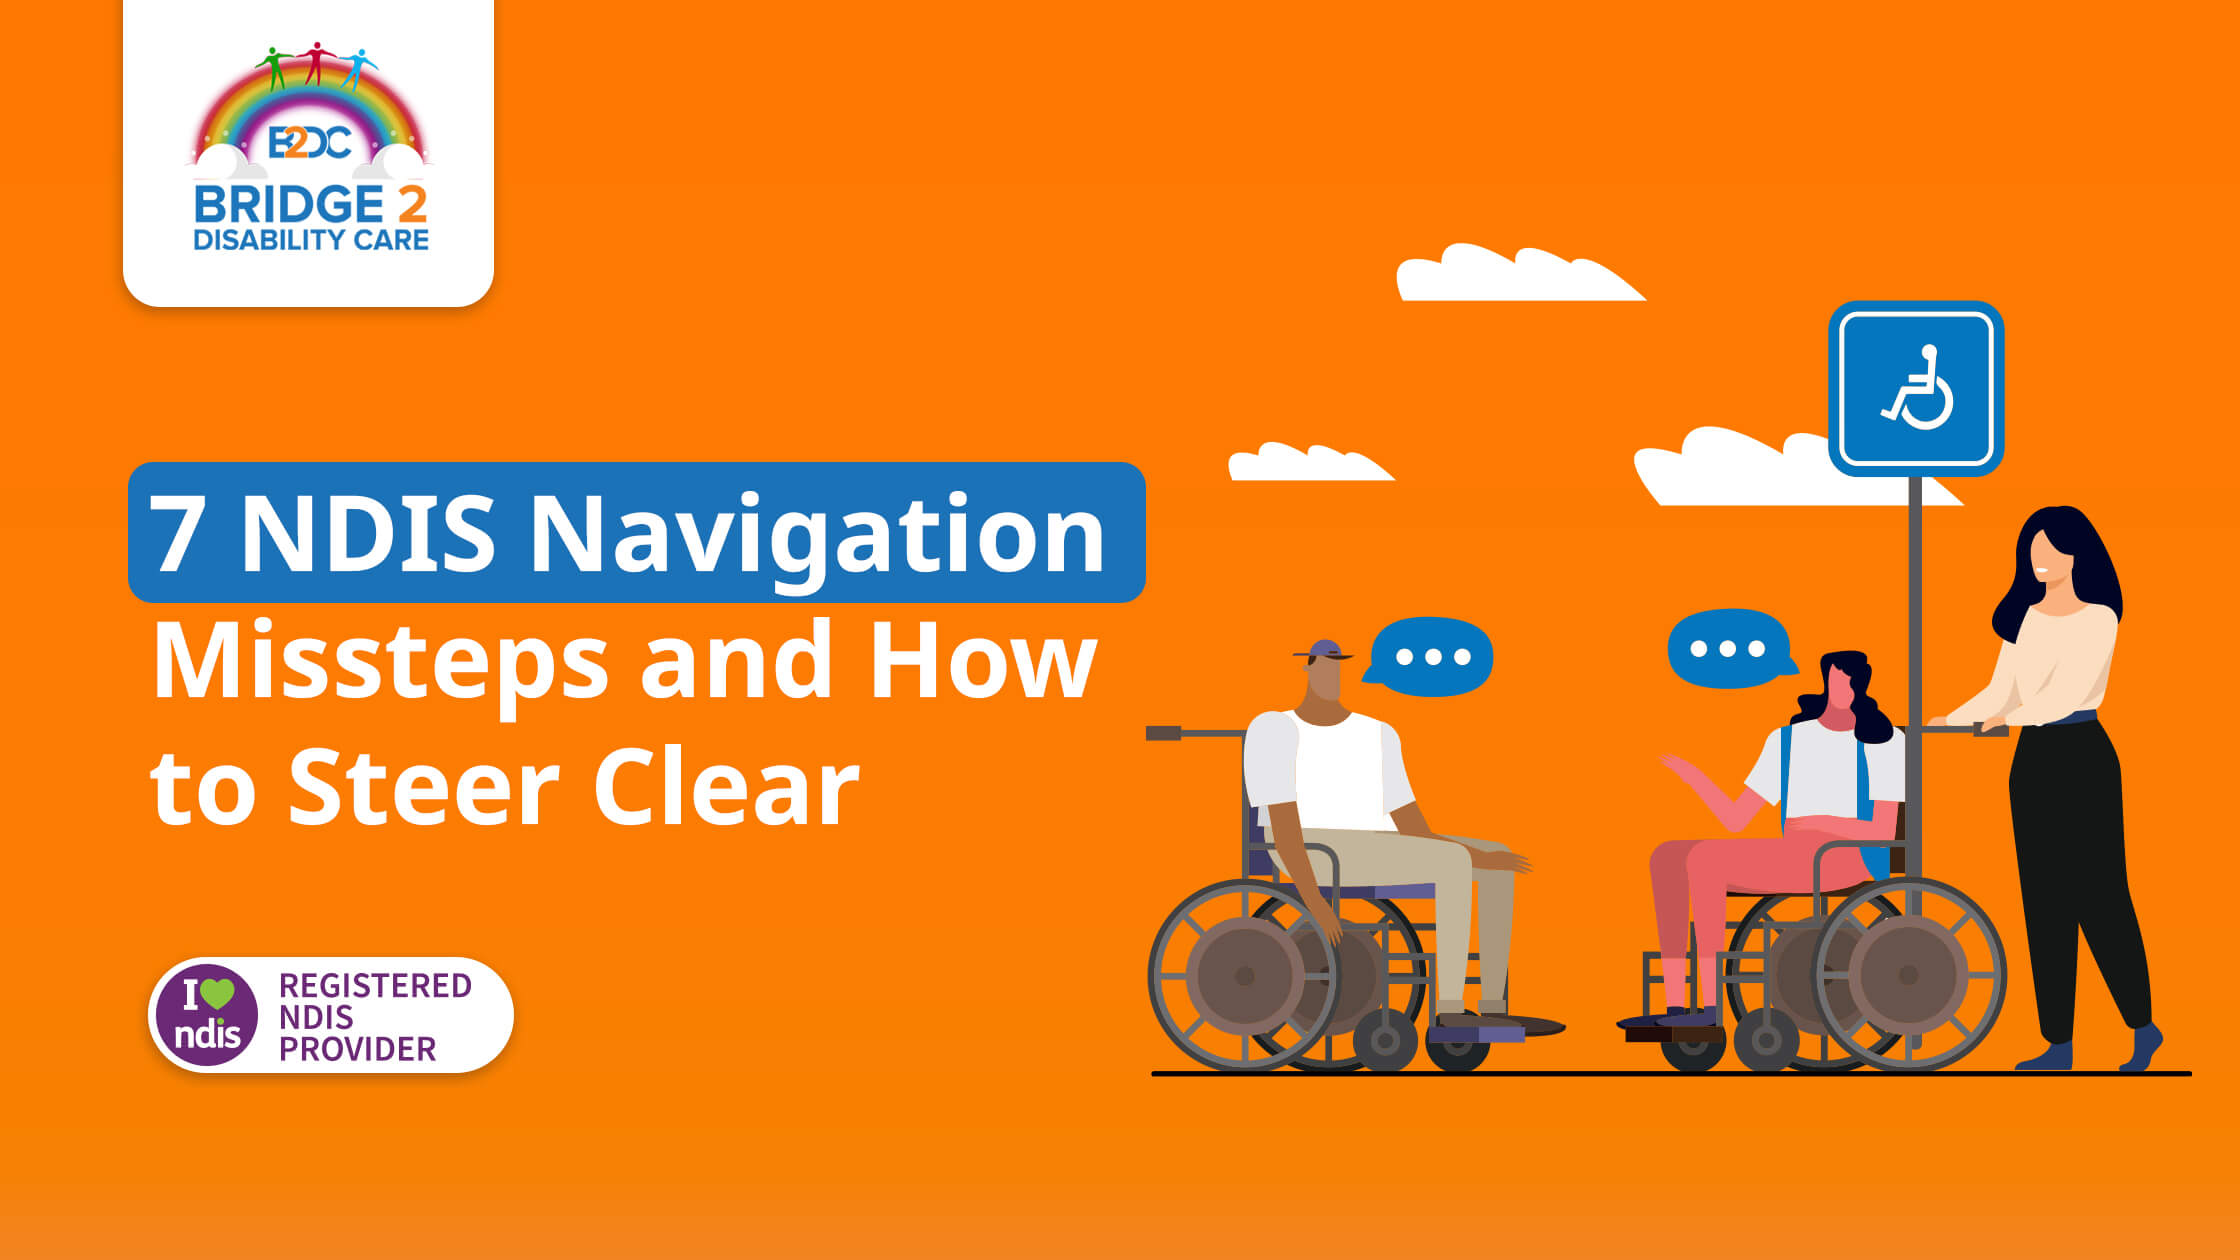 7 NDIS Navigation Missteps and How to Steer Clear